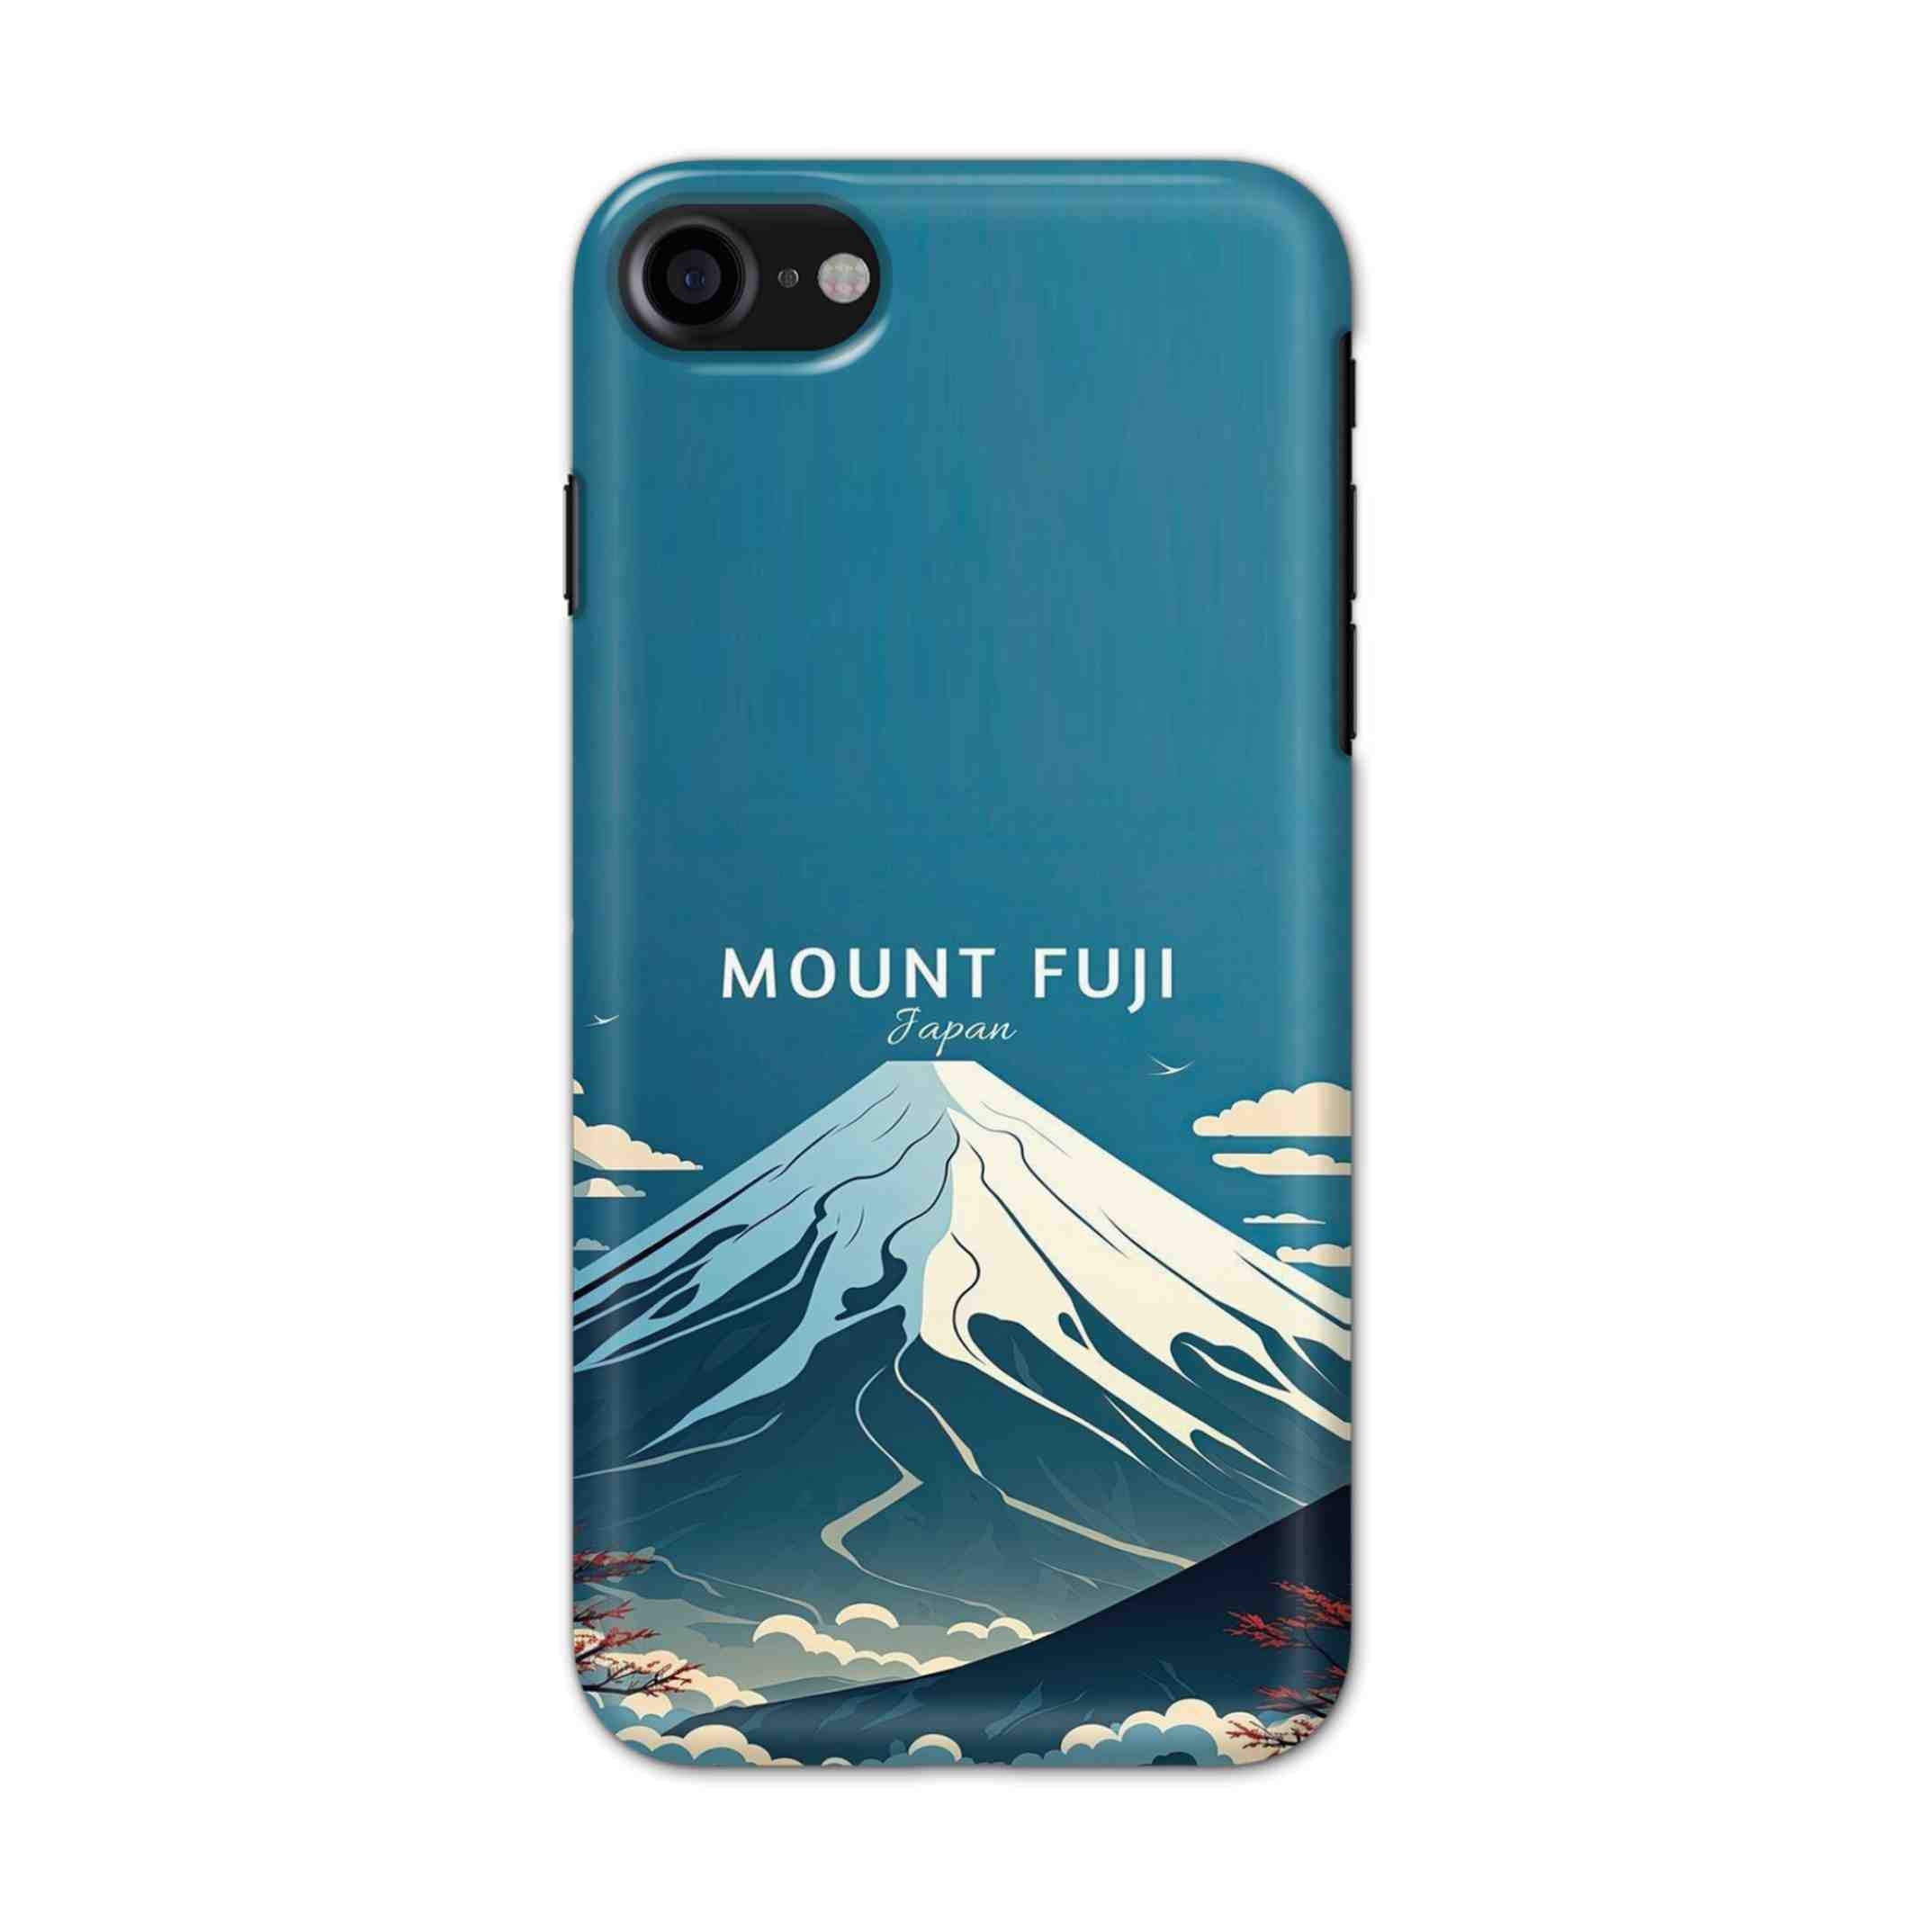 Buy Mount Fuji Hard Back Mobile Phone Case/Cover For iPhone 7 / 8 Online